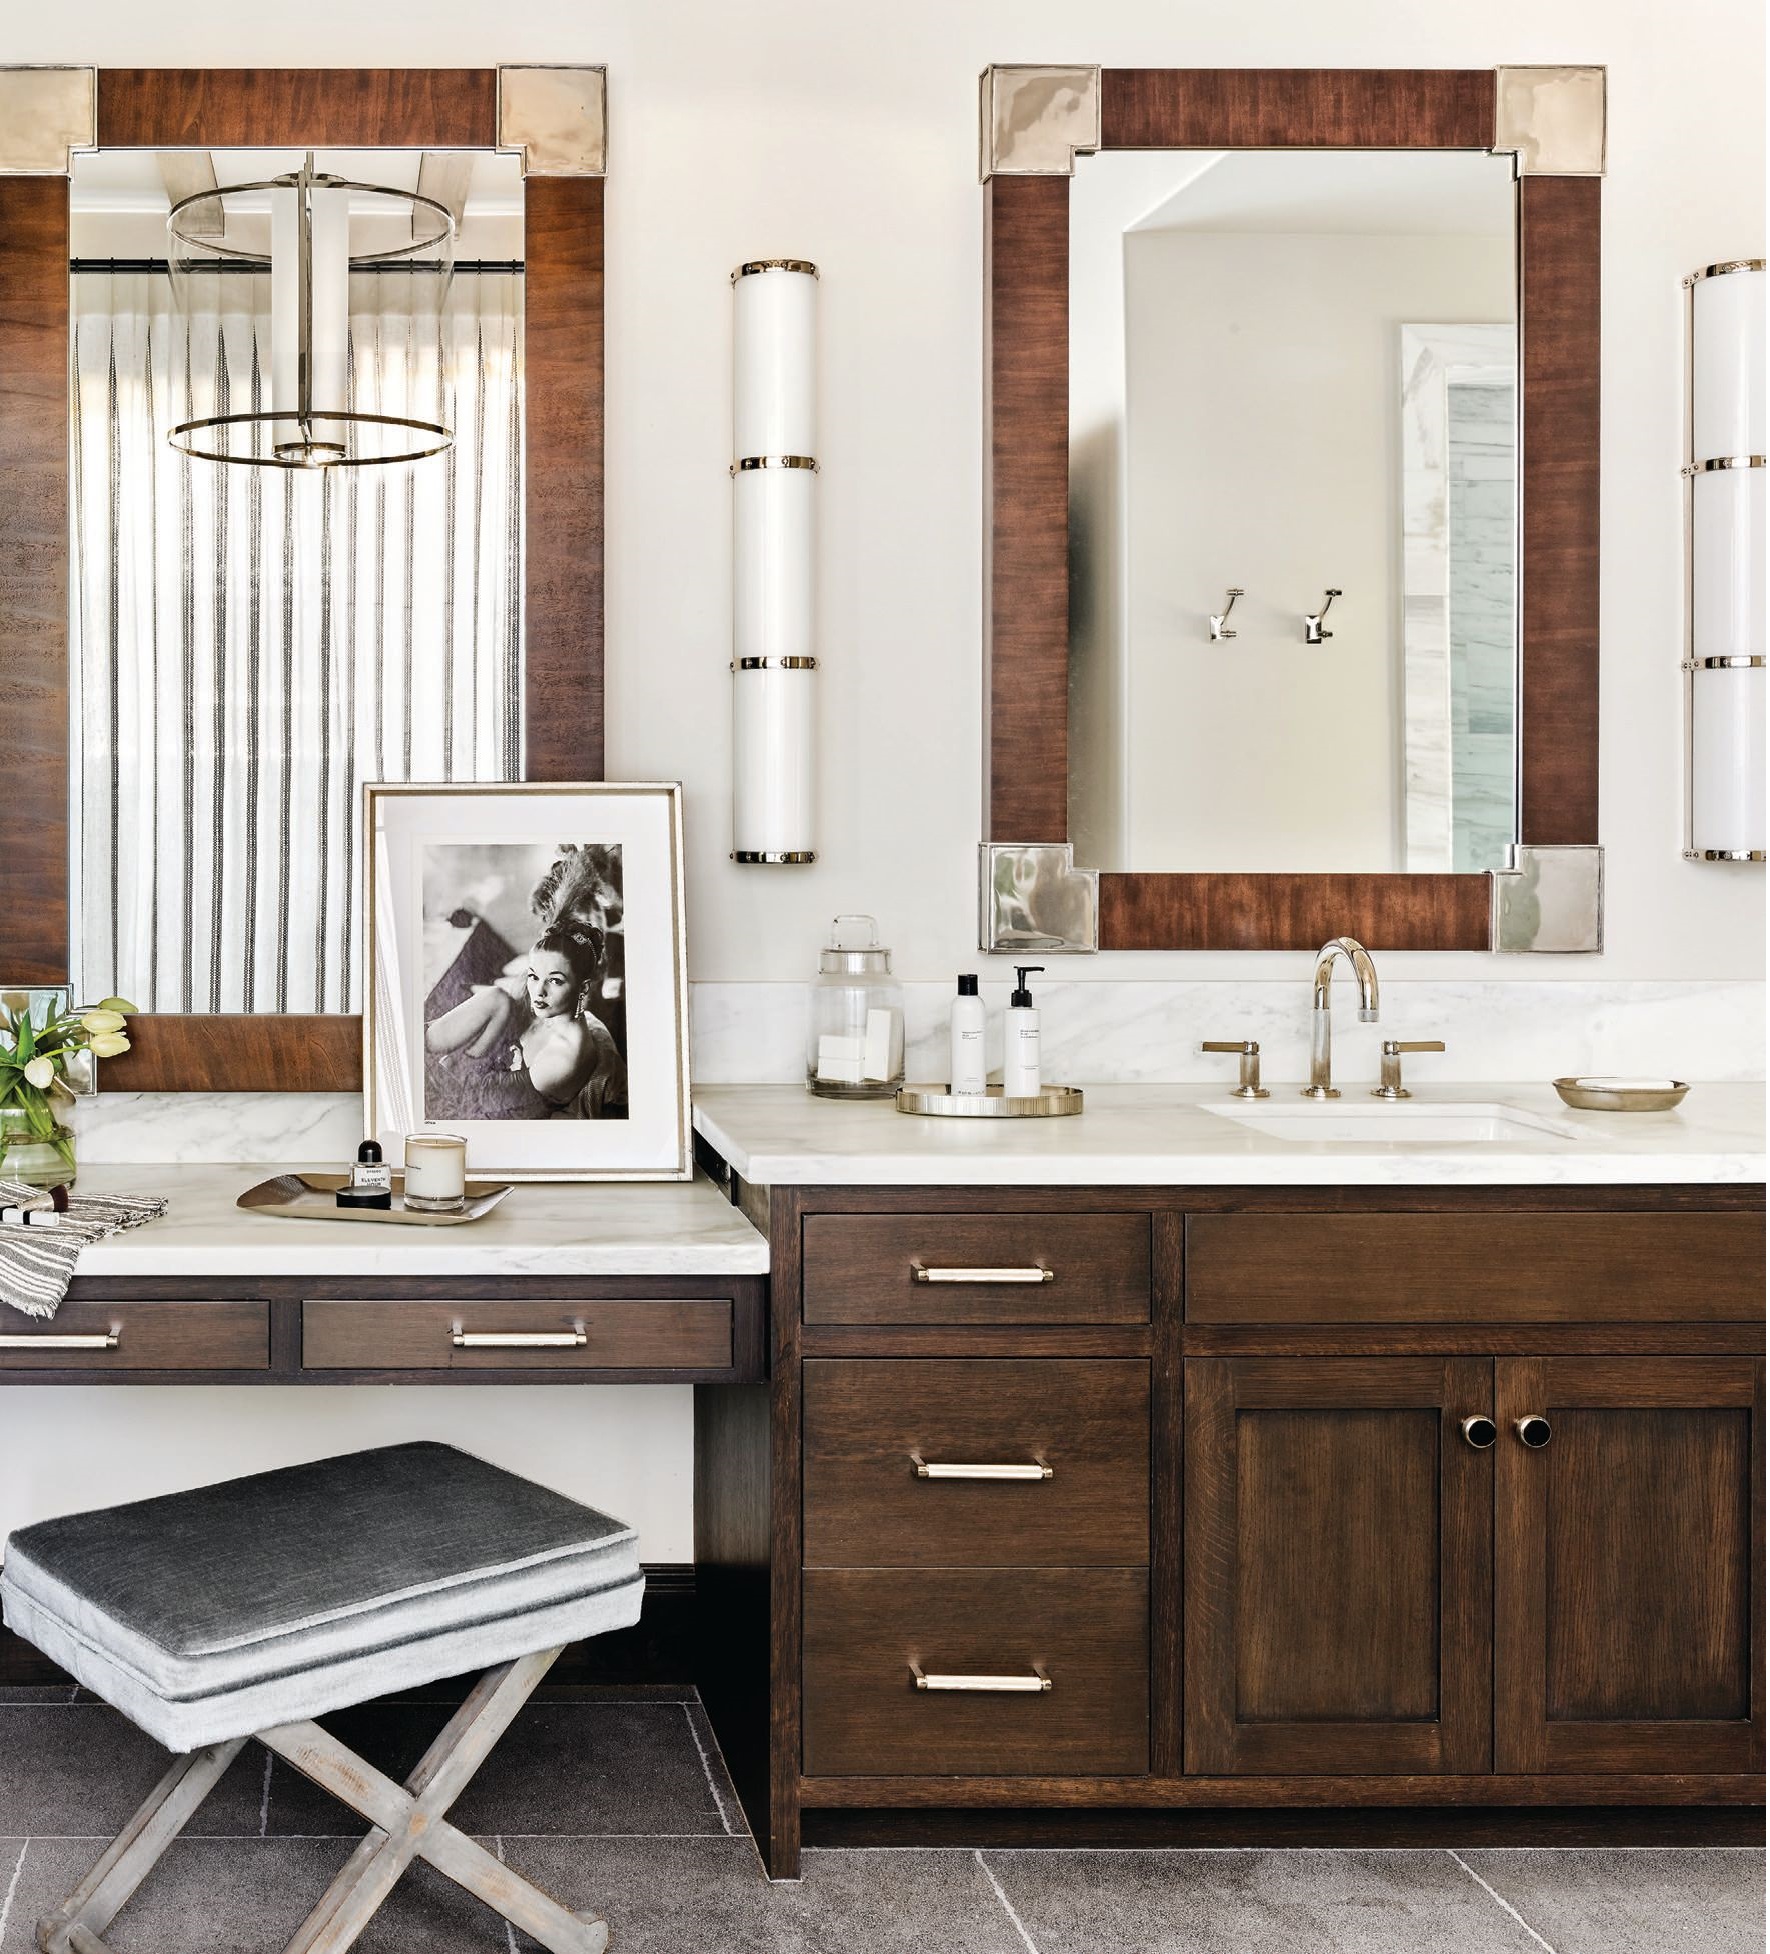 The primary bathroom’s limestone floors by Craftsman Court Ceramics blend harmoniously with vanities by Desert Cove Woodworks and handsome mirrors by Hickory Chair. PHOTOGRAPHED BY WERNER SEGARRA